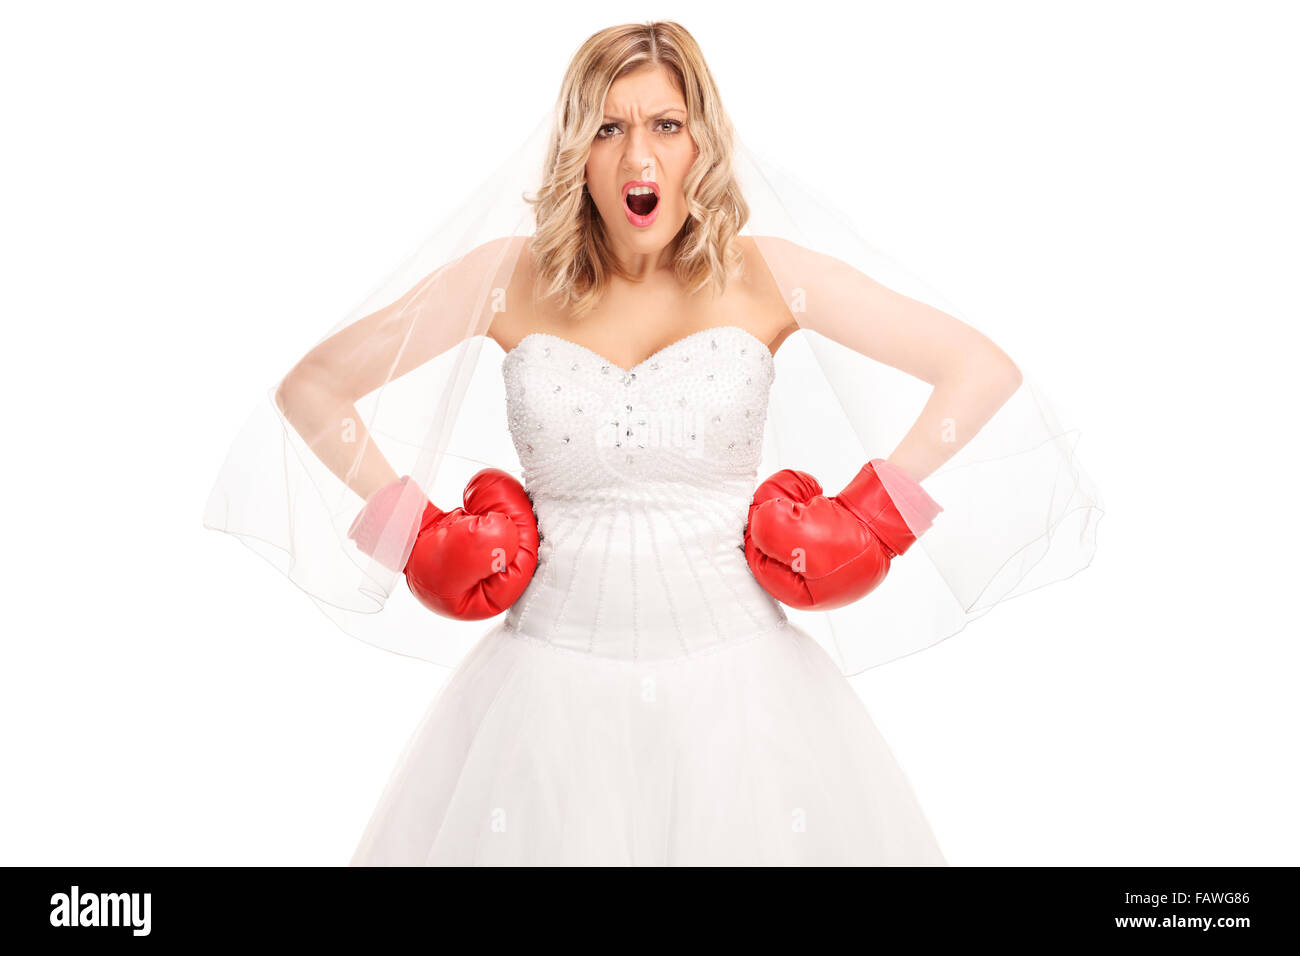 Angry bride in a white wedding dress and red boxing gloves looking at the camera isolated on white background Stock Photo